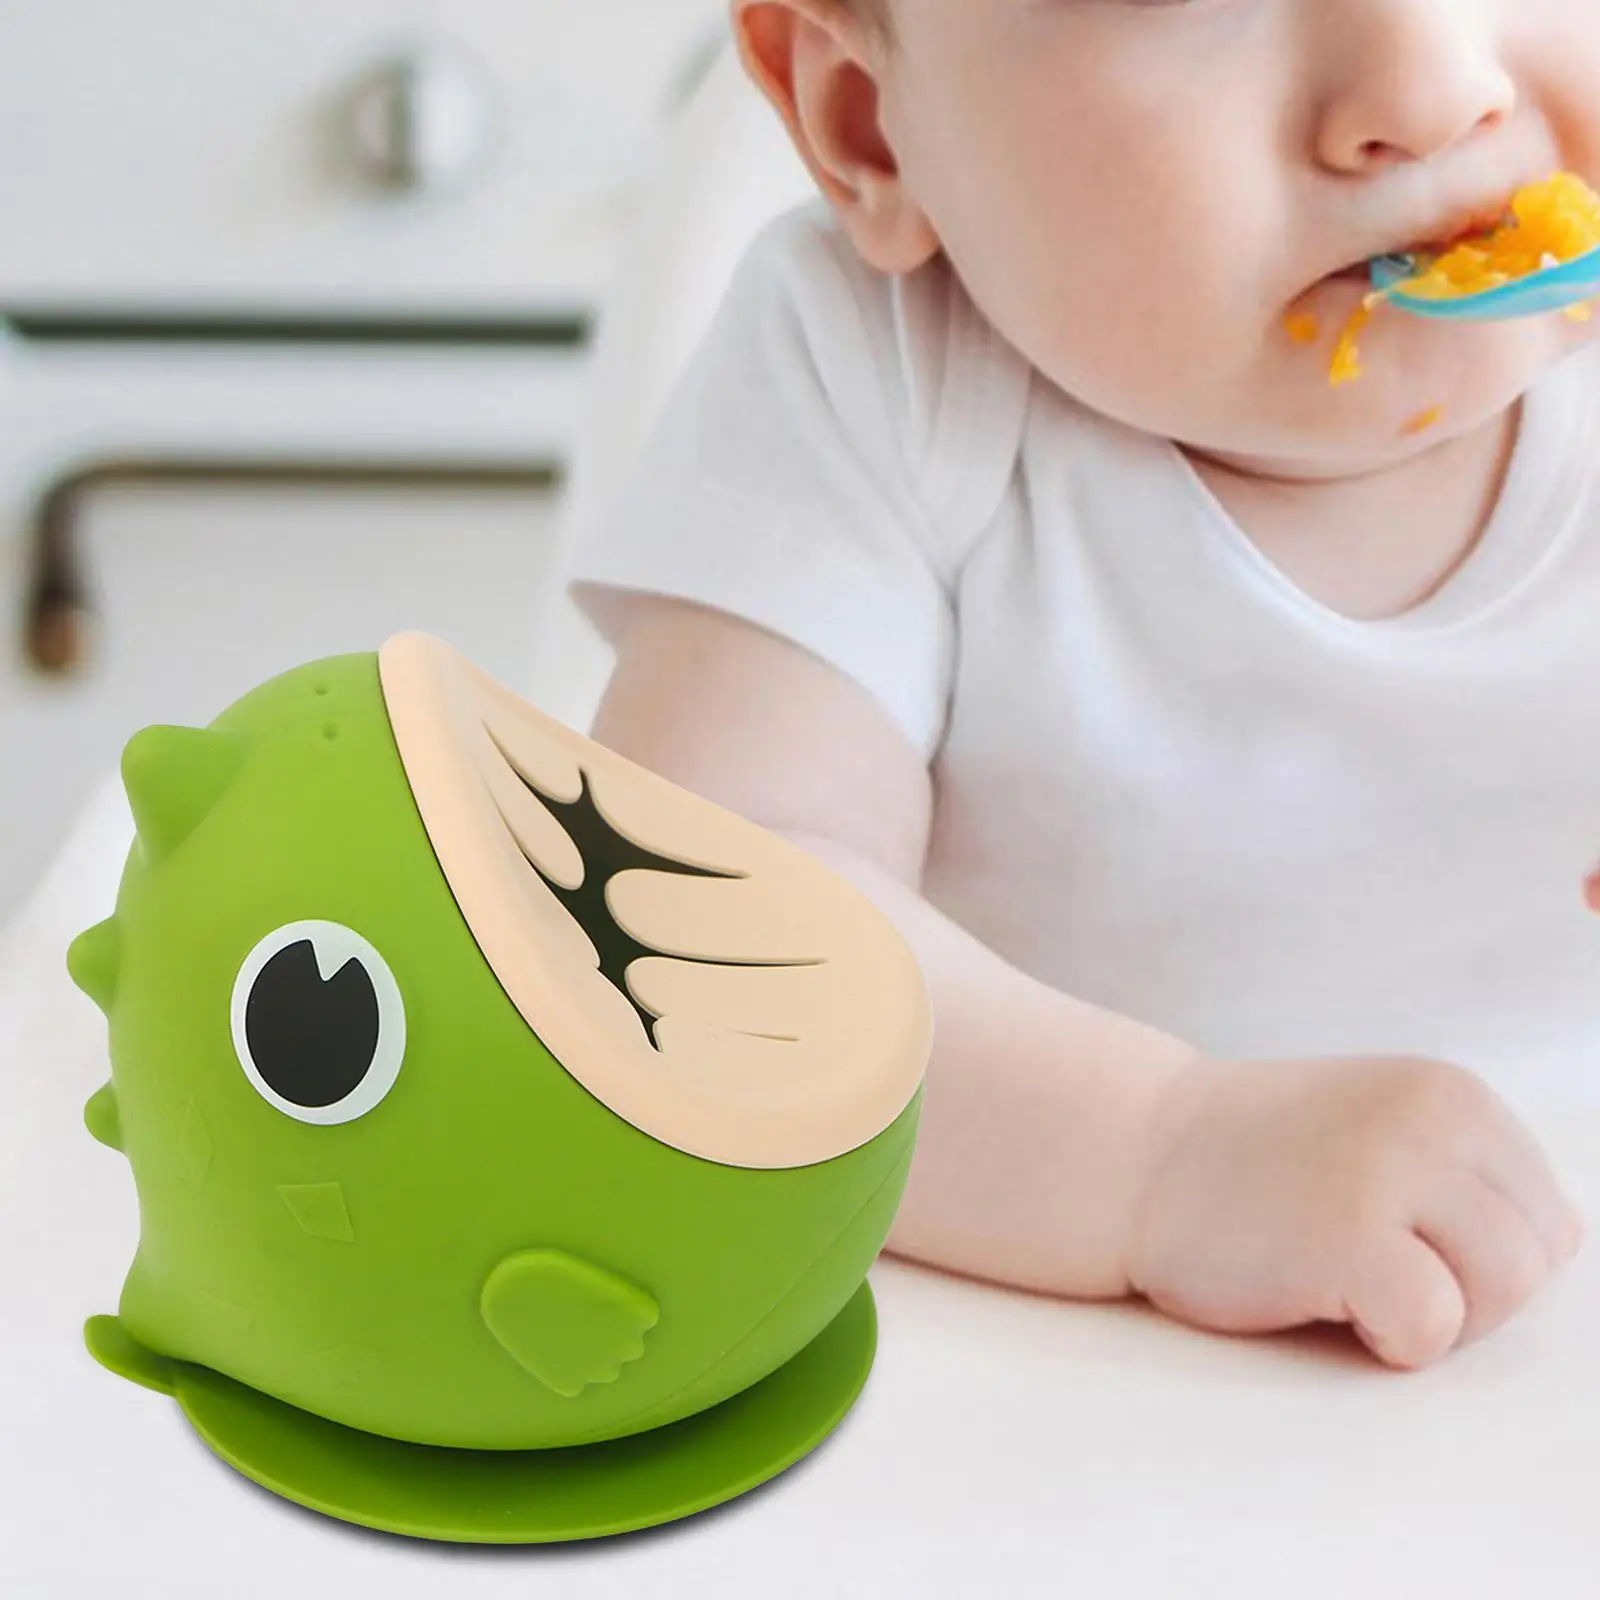 Baby Food Bowl with Removable Bowl Lid Food Plates Sucker Bowl Baby Bowl Silicone Baby Feeding Bowl for Babies Kids